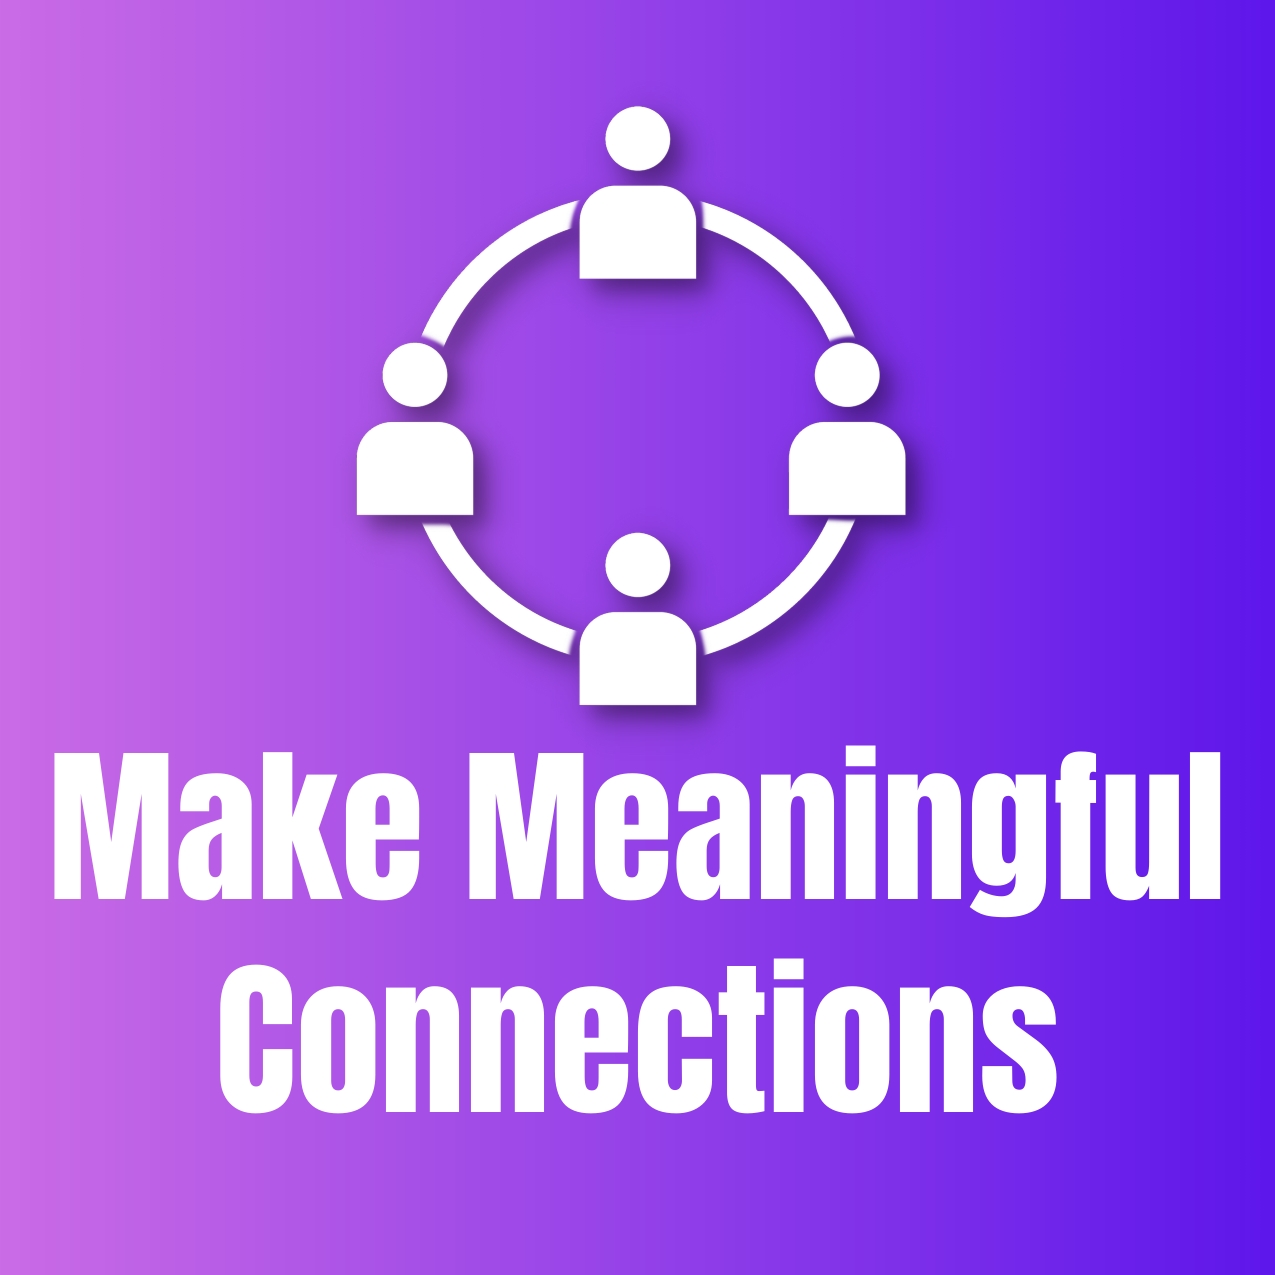 Make Meaningful Connections